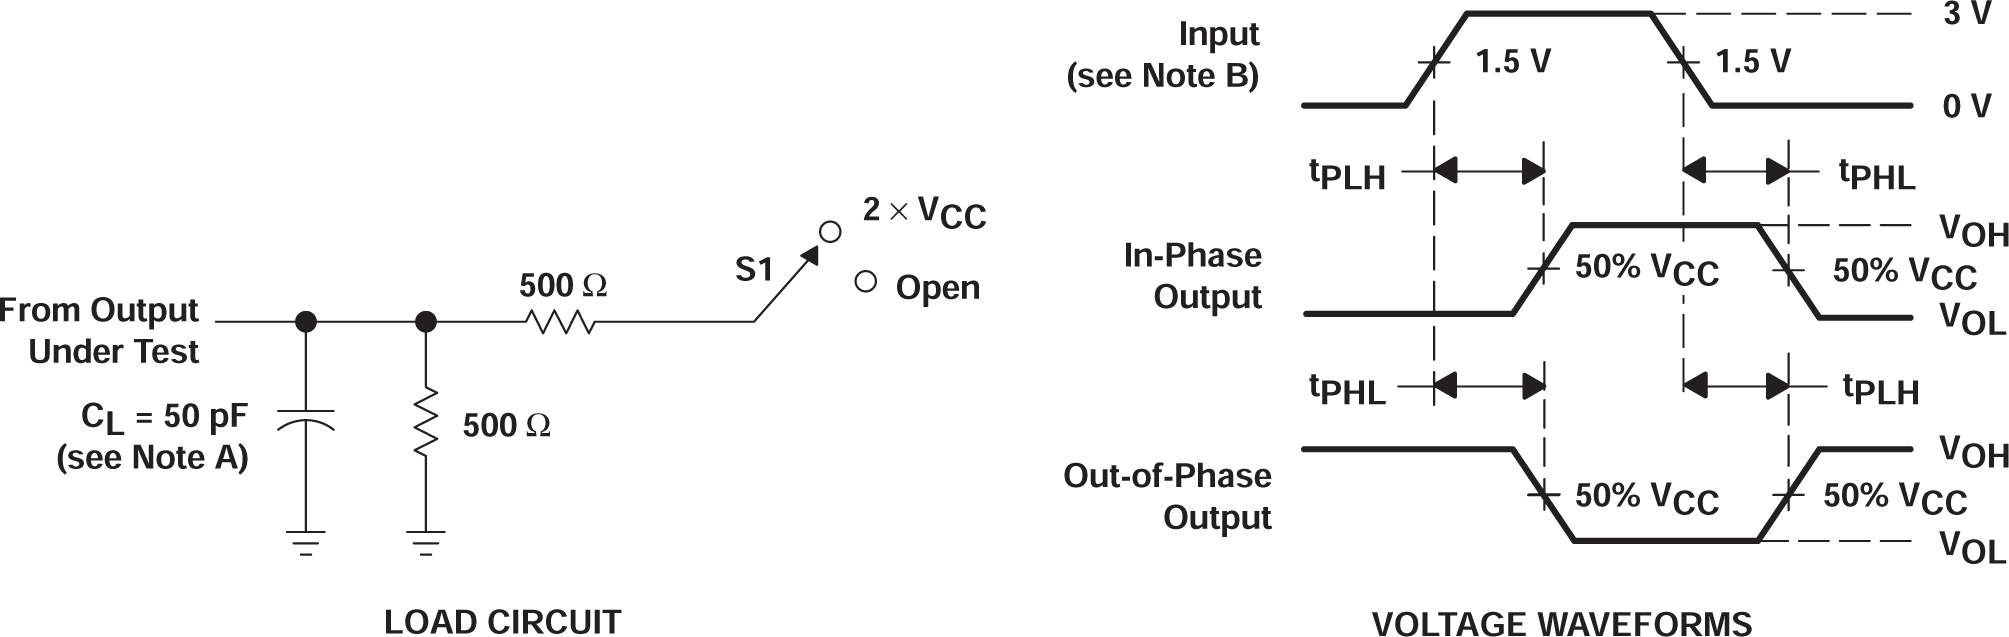 SN74ACT32 Load Circuit and Voltage Waveforms